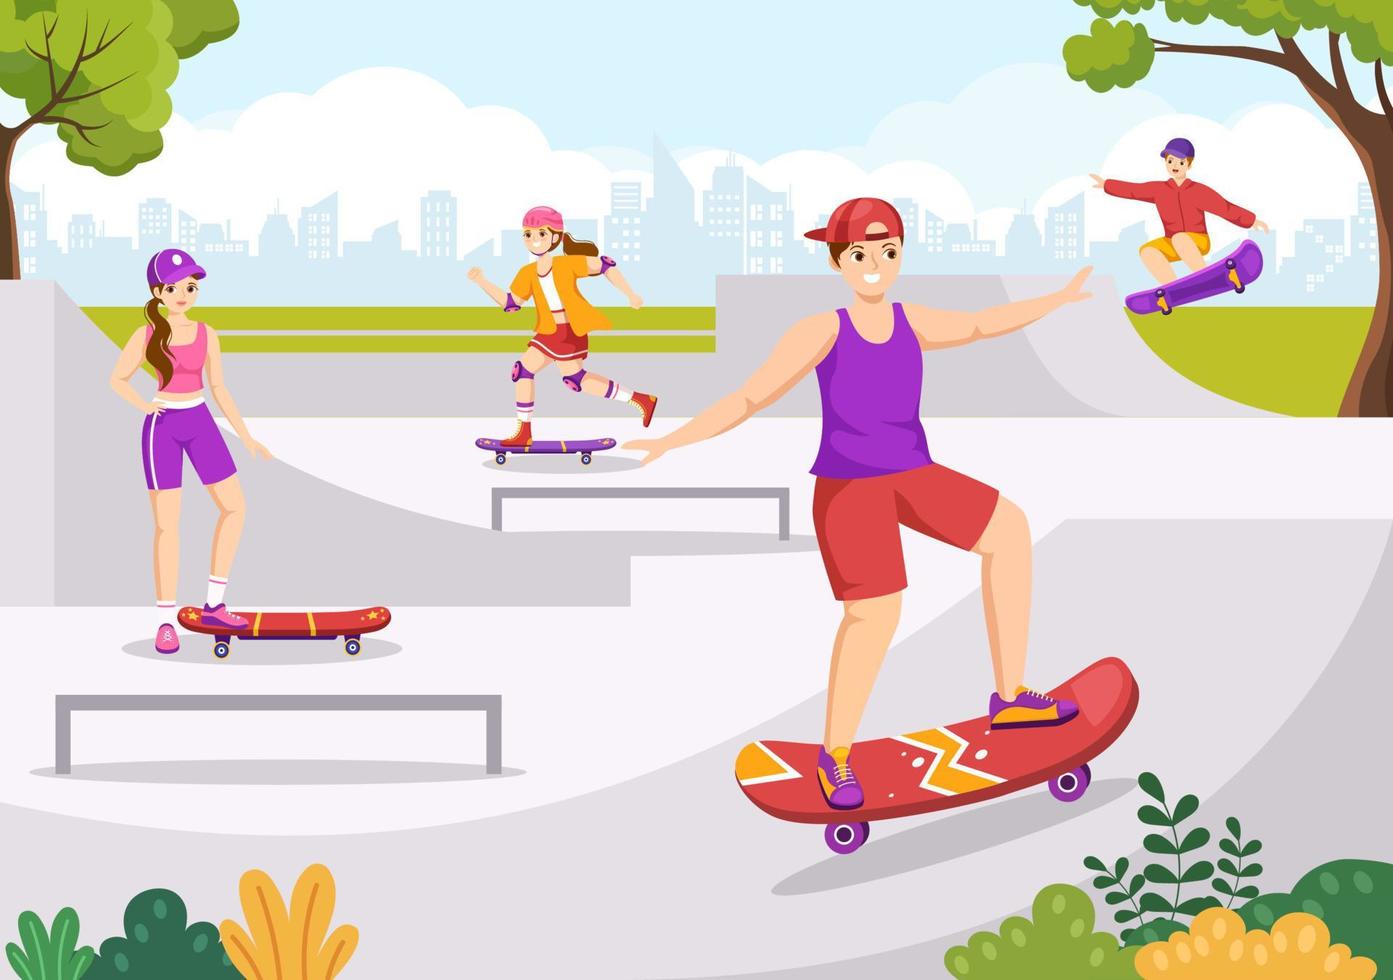 Skateboard Illustration with Skateboarders Jump using Board on Springboard in Skatepark in Extreme Sport Flat Style Cartoon Hand Drawn Templates vector